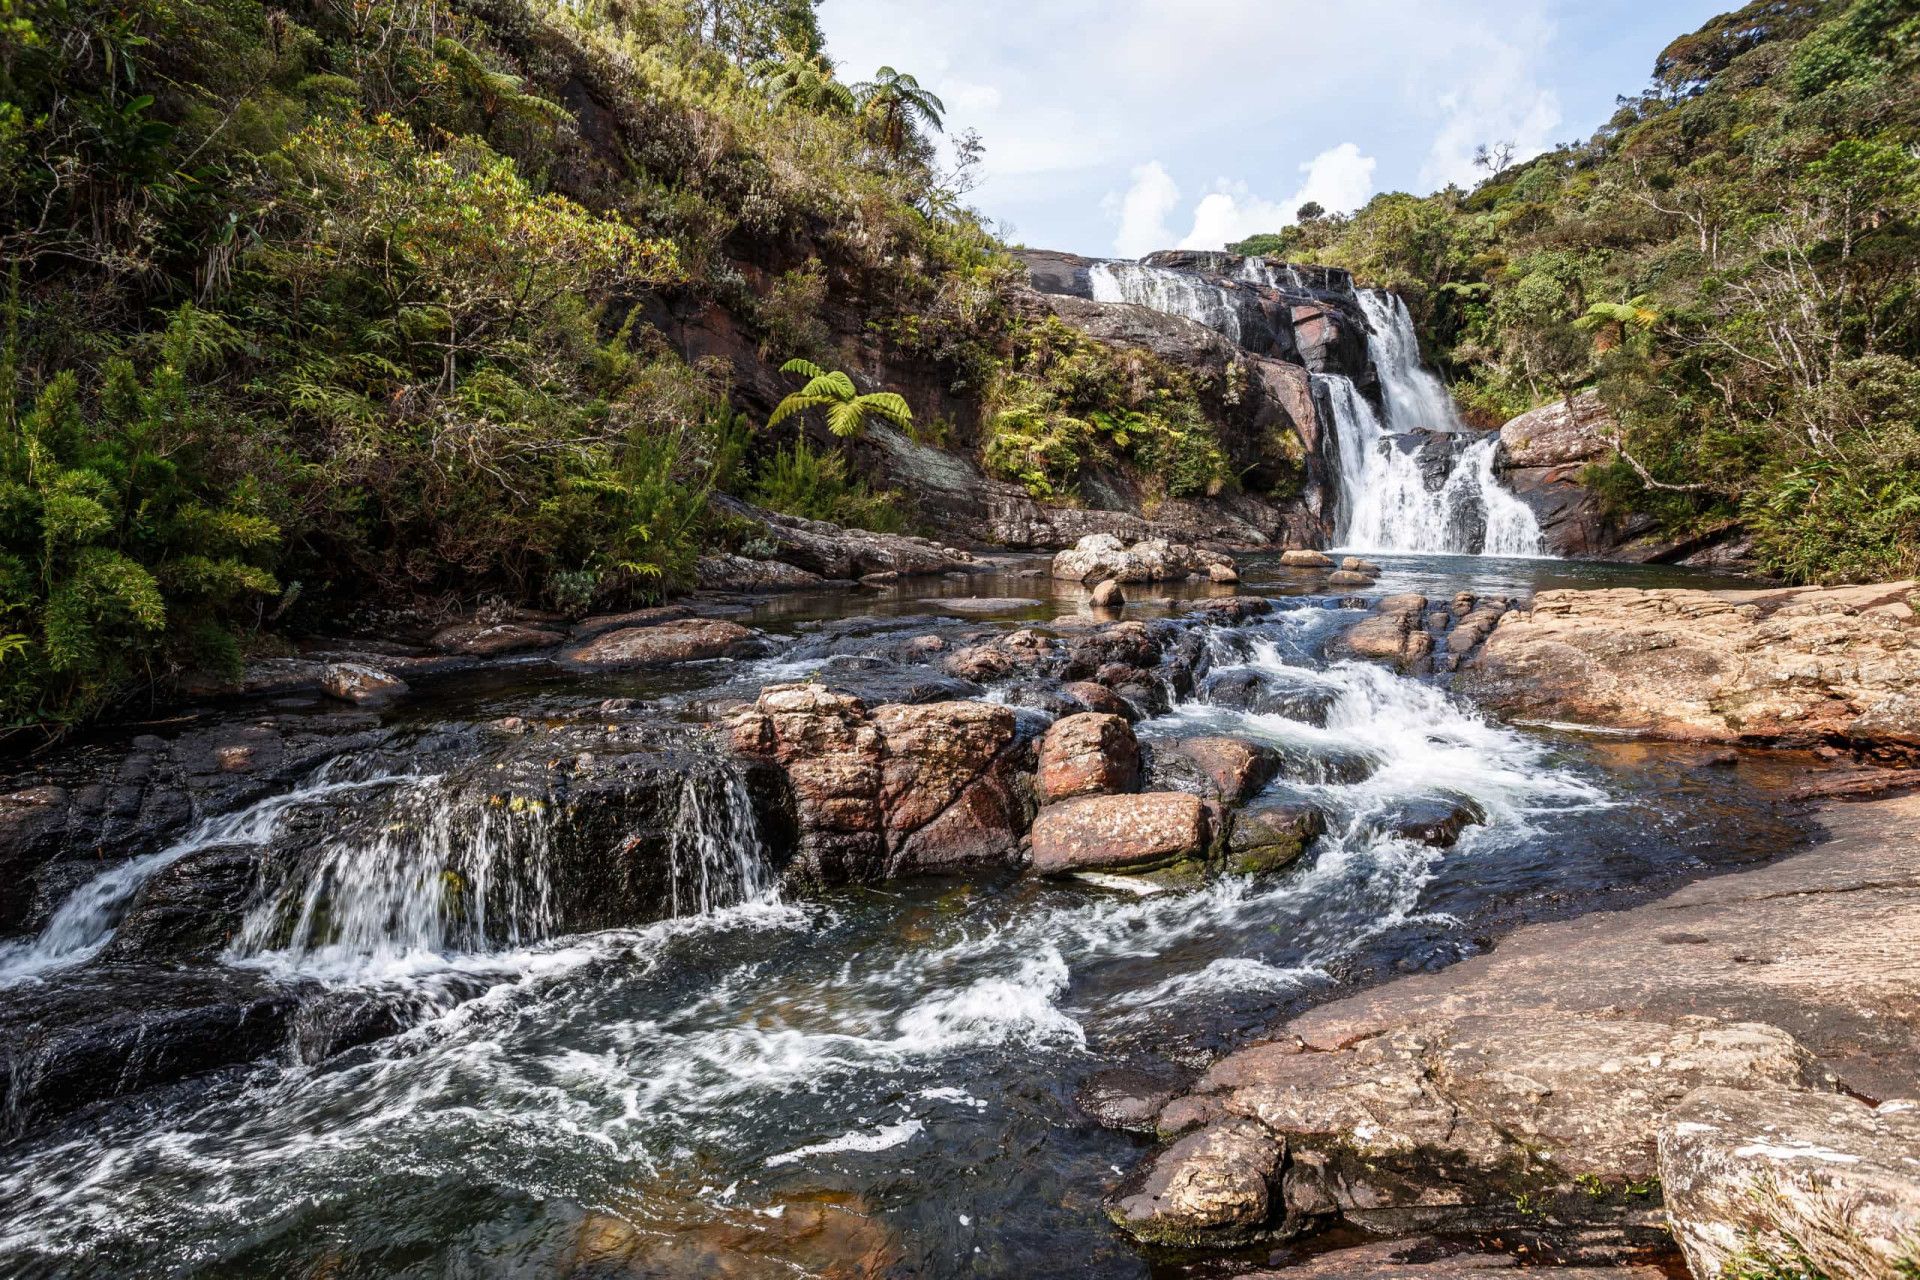 <p>Baker's Falls, named after English explorer Samuel Baker (1821–1893), is one of the park's most famous natural wonders.</p><p><a href="https://www.msn.com/en-us/community/channel/vid-7xx8mnucu55yw63we9va2gwr7uihbxwc68fxqp25x6tg4ftibpra?cvid=94631541bc0f4f89bfd59158d696ad7e">Follow us and access great exclusive content every day</a></p>